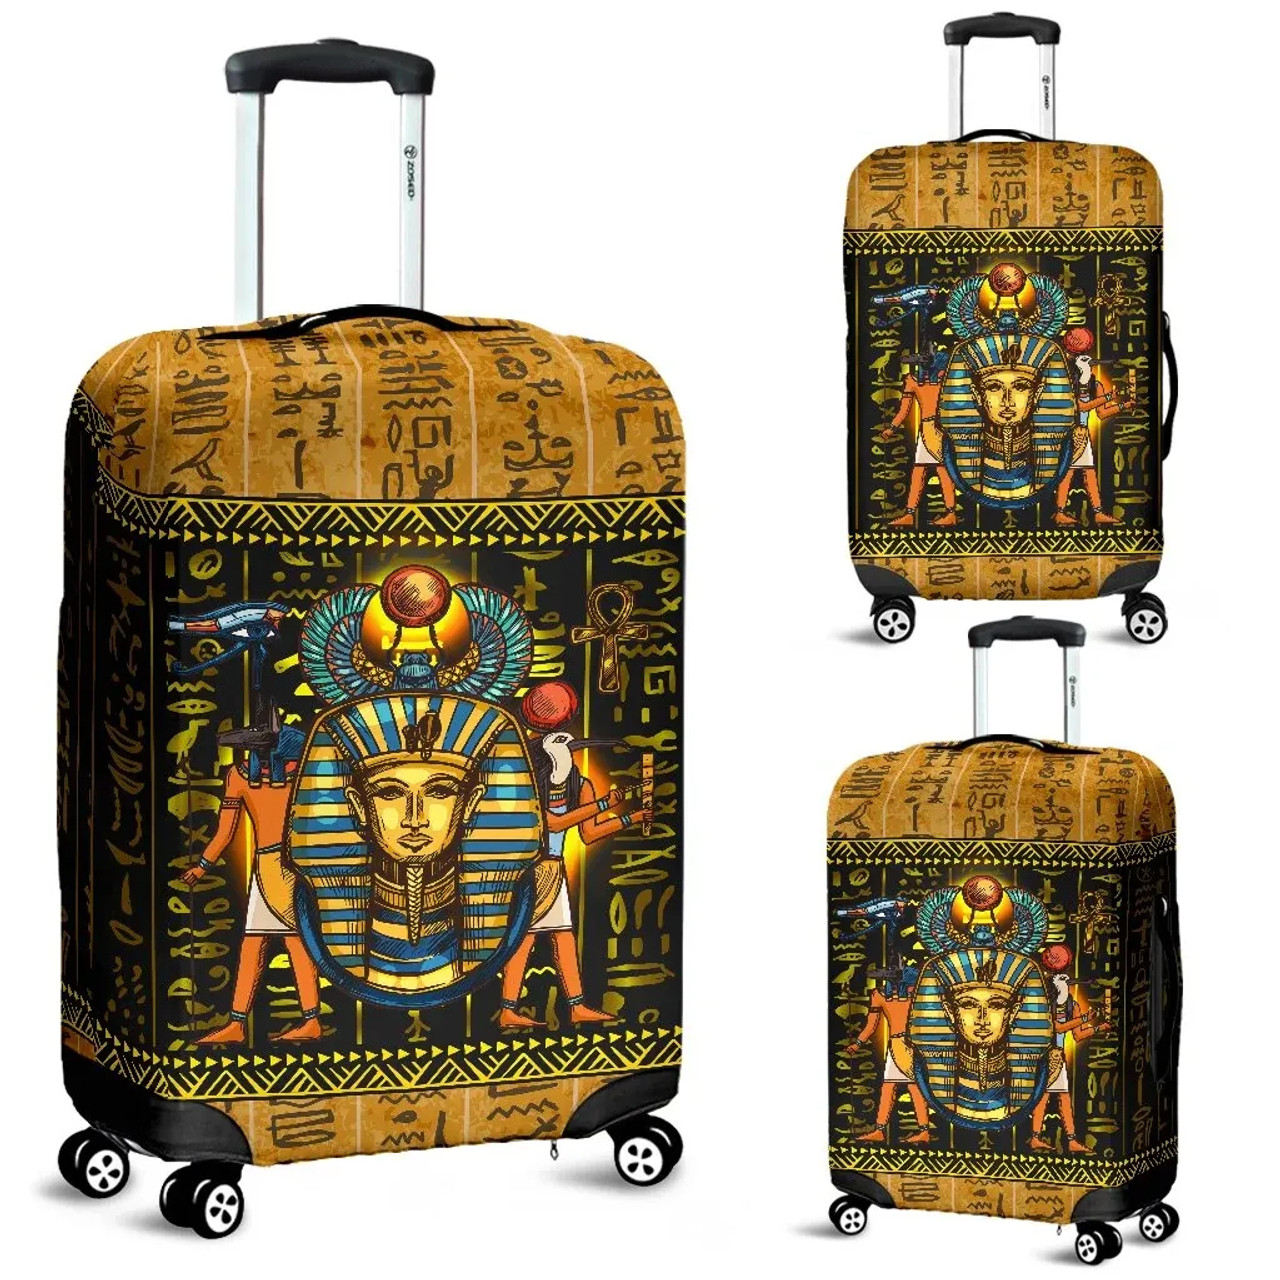 Egyptian Luggage Cover - African Patterns Mysteries Of Ancient Egypt Luggage Cover